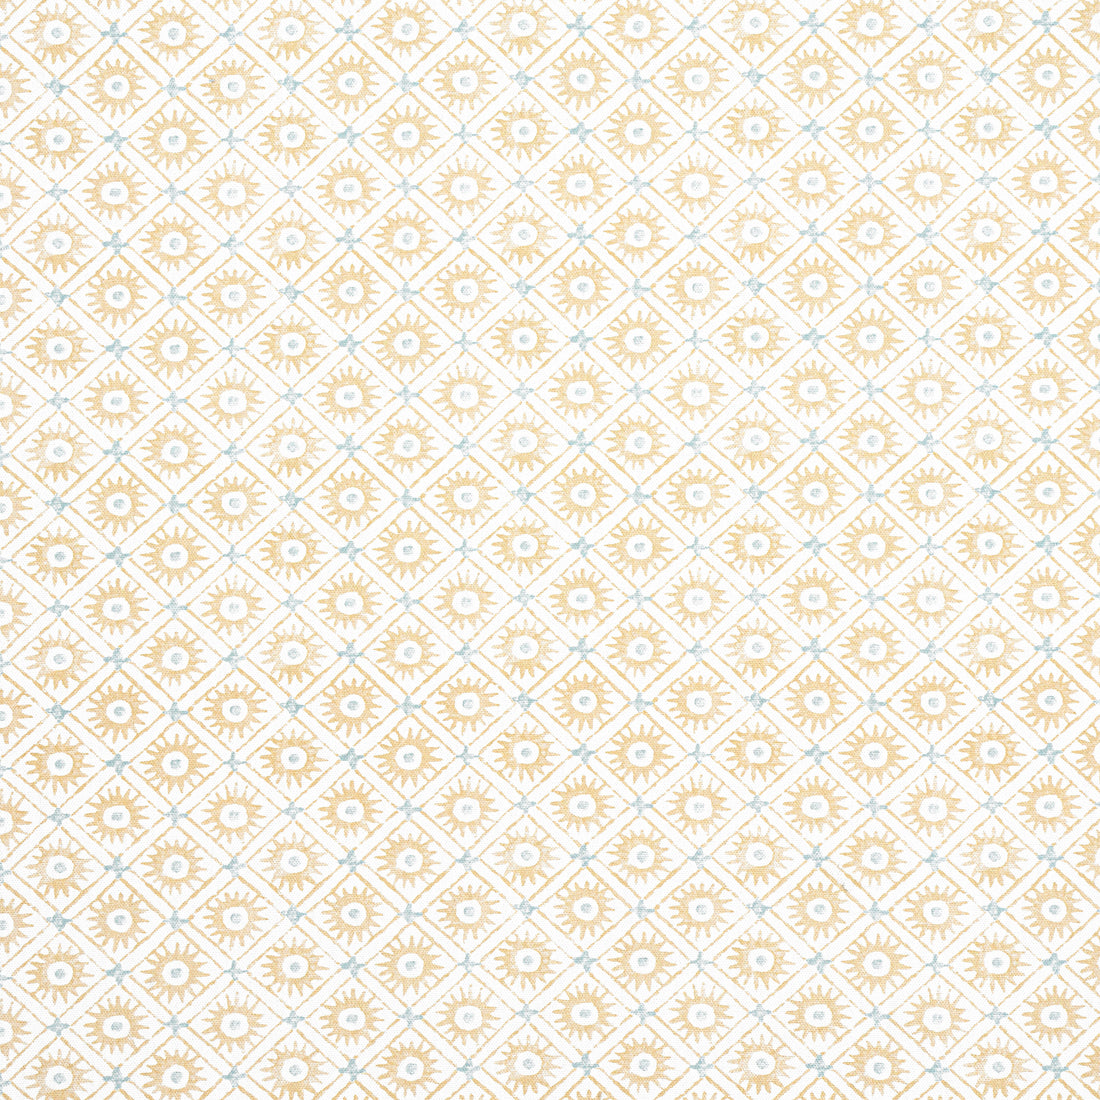 Mini Sun fabric in Soft Gold color - pattern number AF24566 - by Anna French in the Devon collection